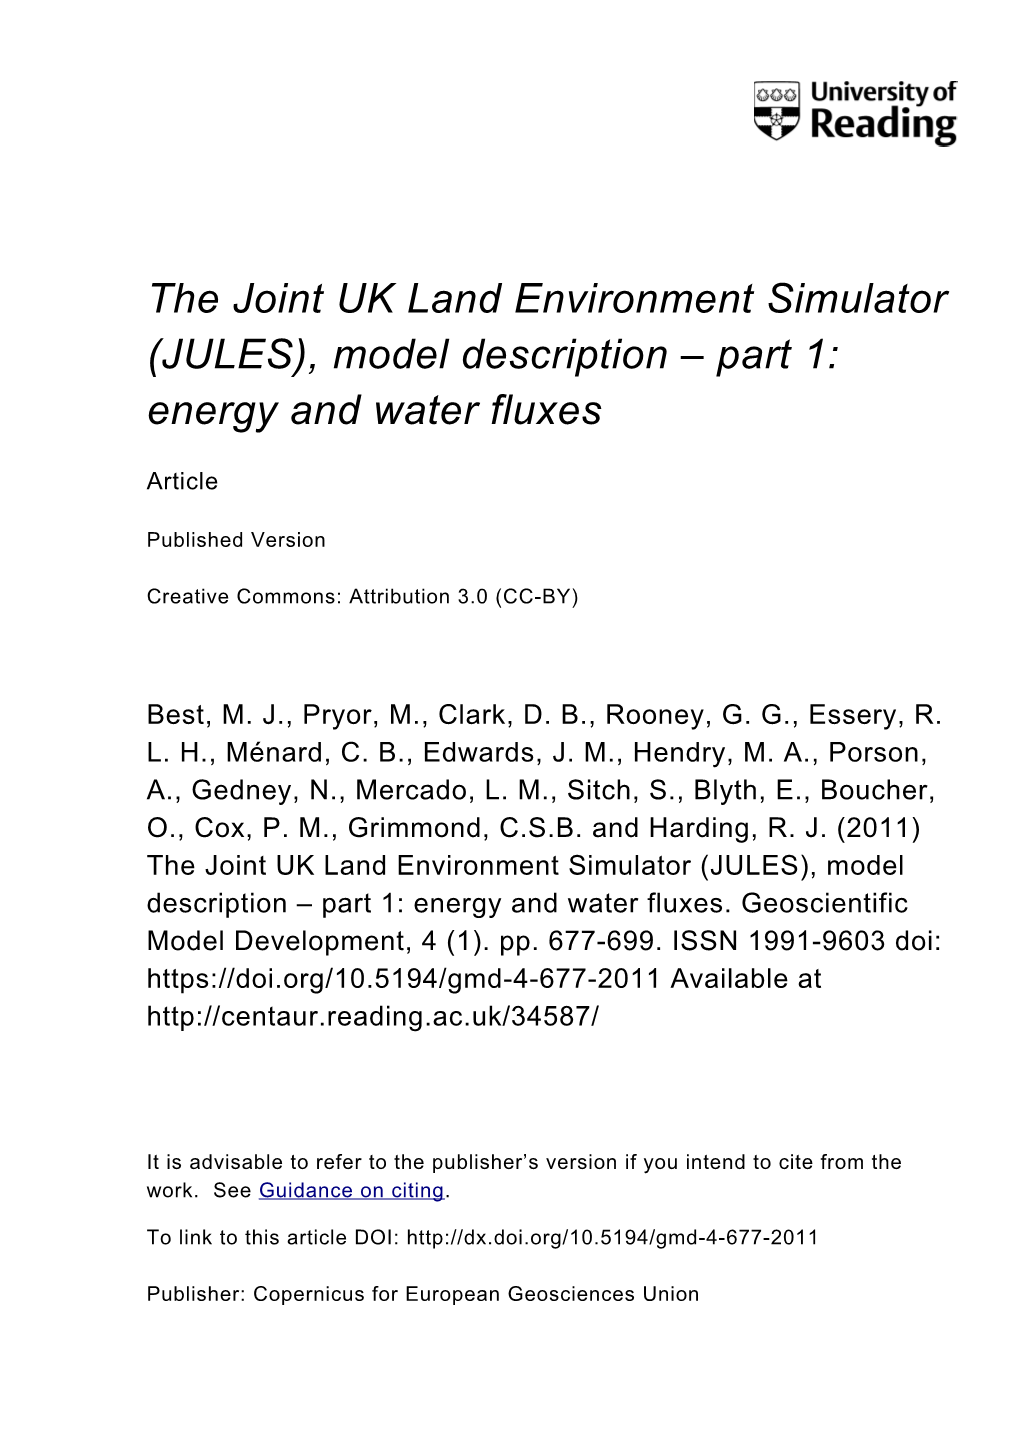 The Joint UK Land Environment Simulator (JULES), Model Description – Part 1: Energy and Water Fluxes